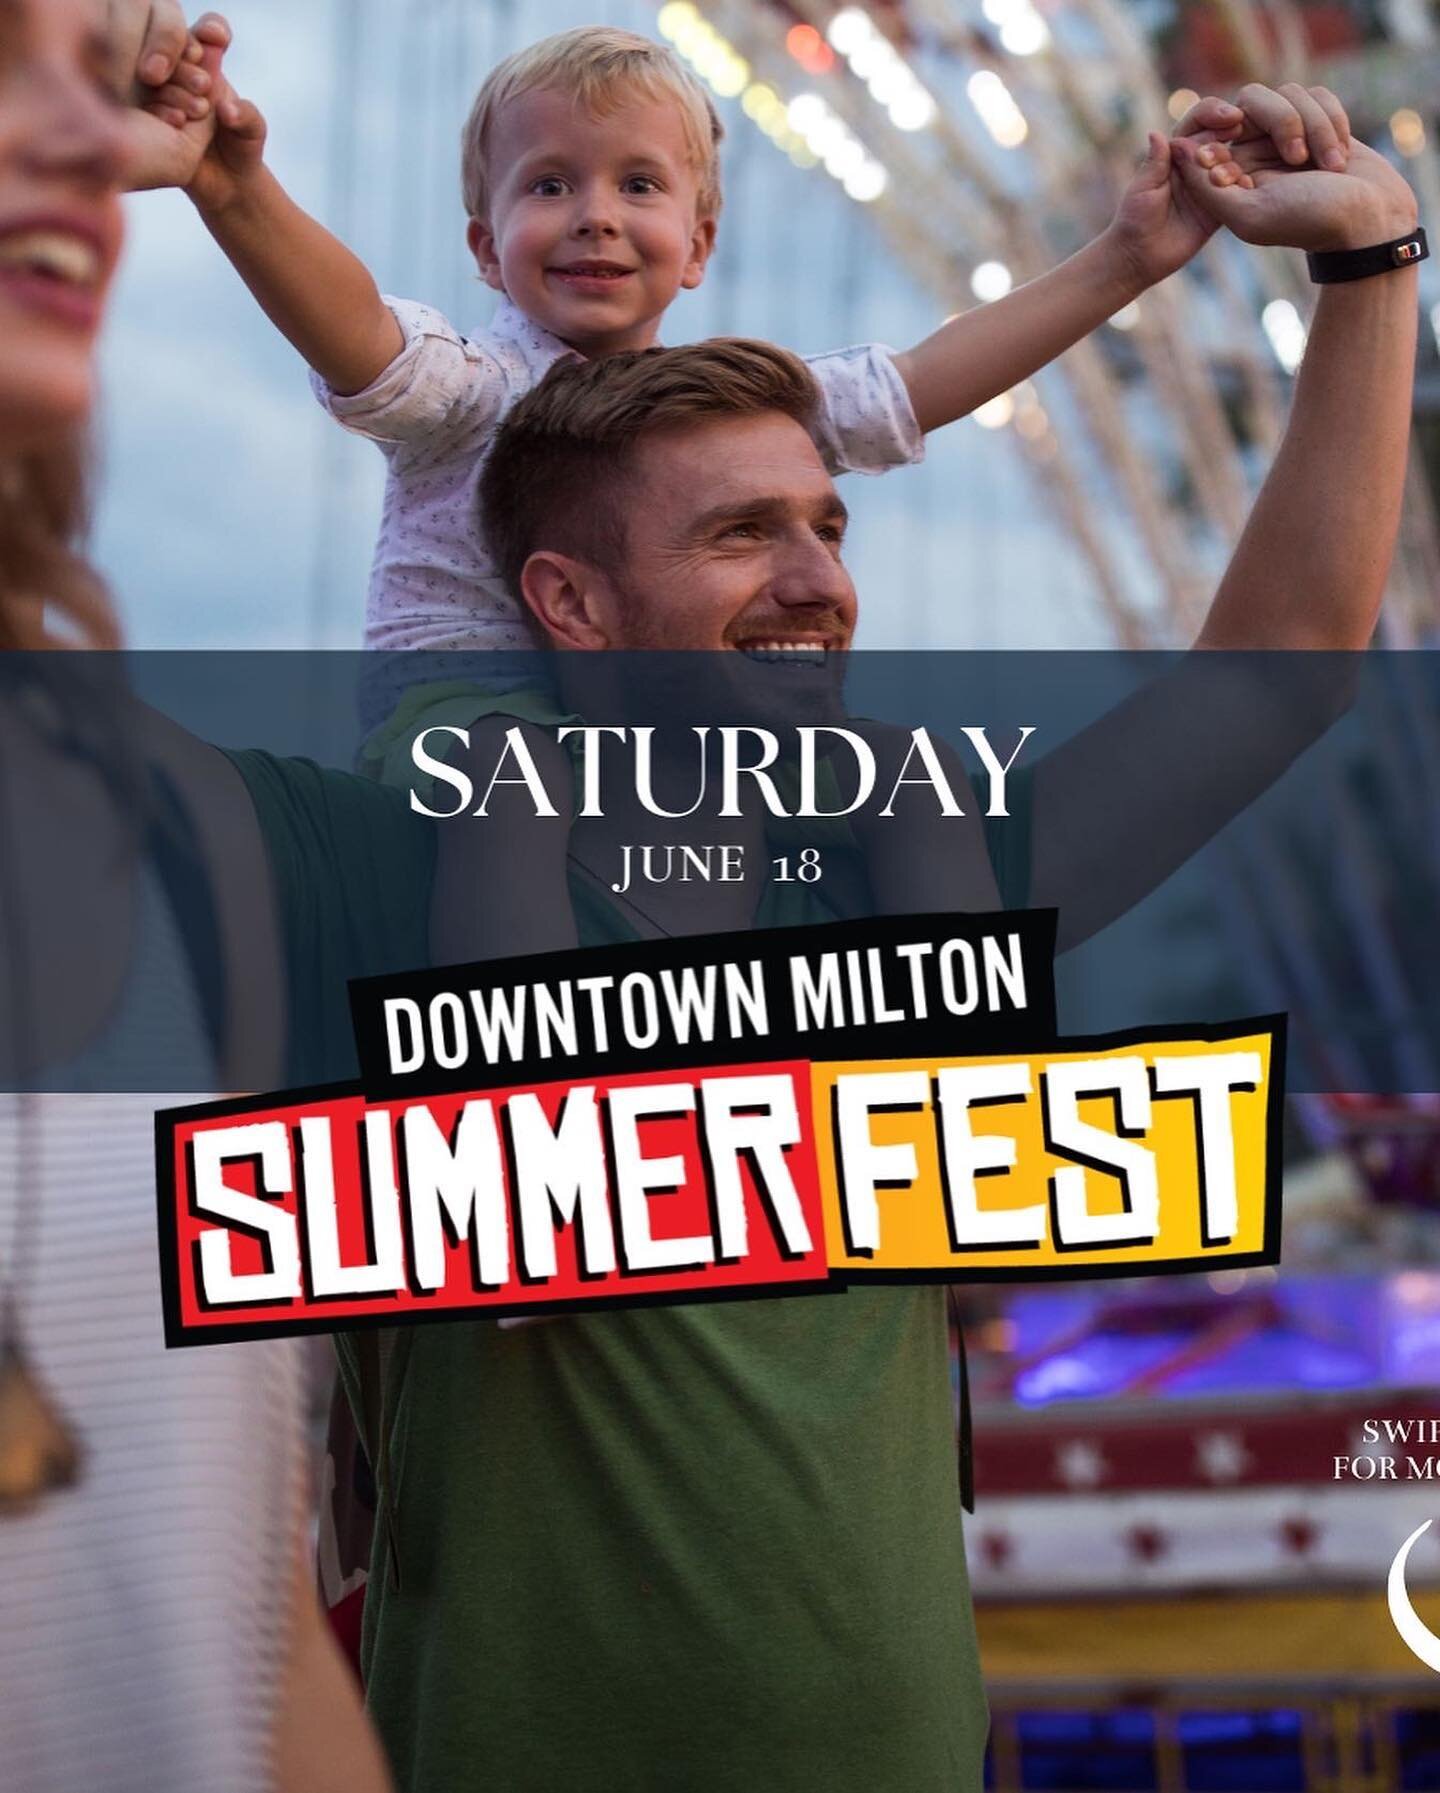 ☀️ DOWNTOWN MILTON - SUMMERFEST ☀️ 

Saturday June 18th 12pm - 8pm
Main St. Milton

Family Fun - games, activities, photo ops

🚗 Displayed Classic &amp; Collection Cars

🎸 Live Music Include: 
The Starlite Dreamers
The DadBodz
The $2 Bills
NorthSho